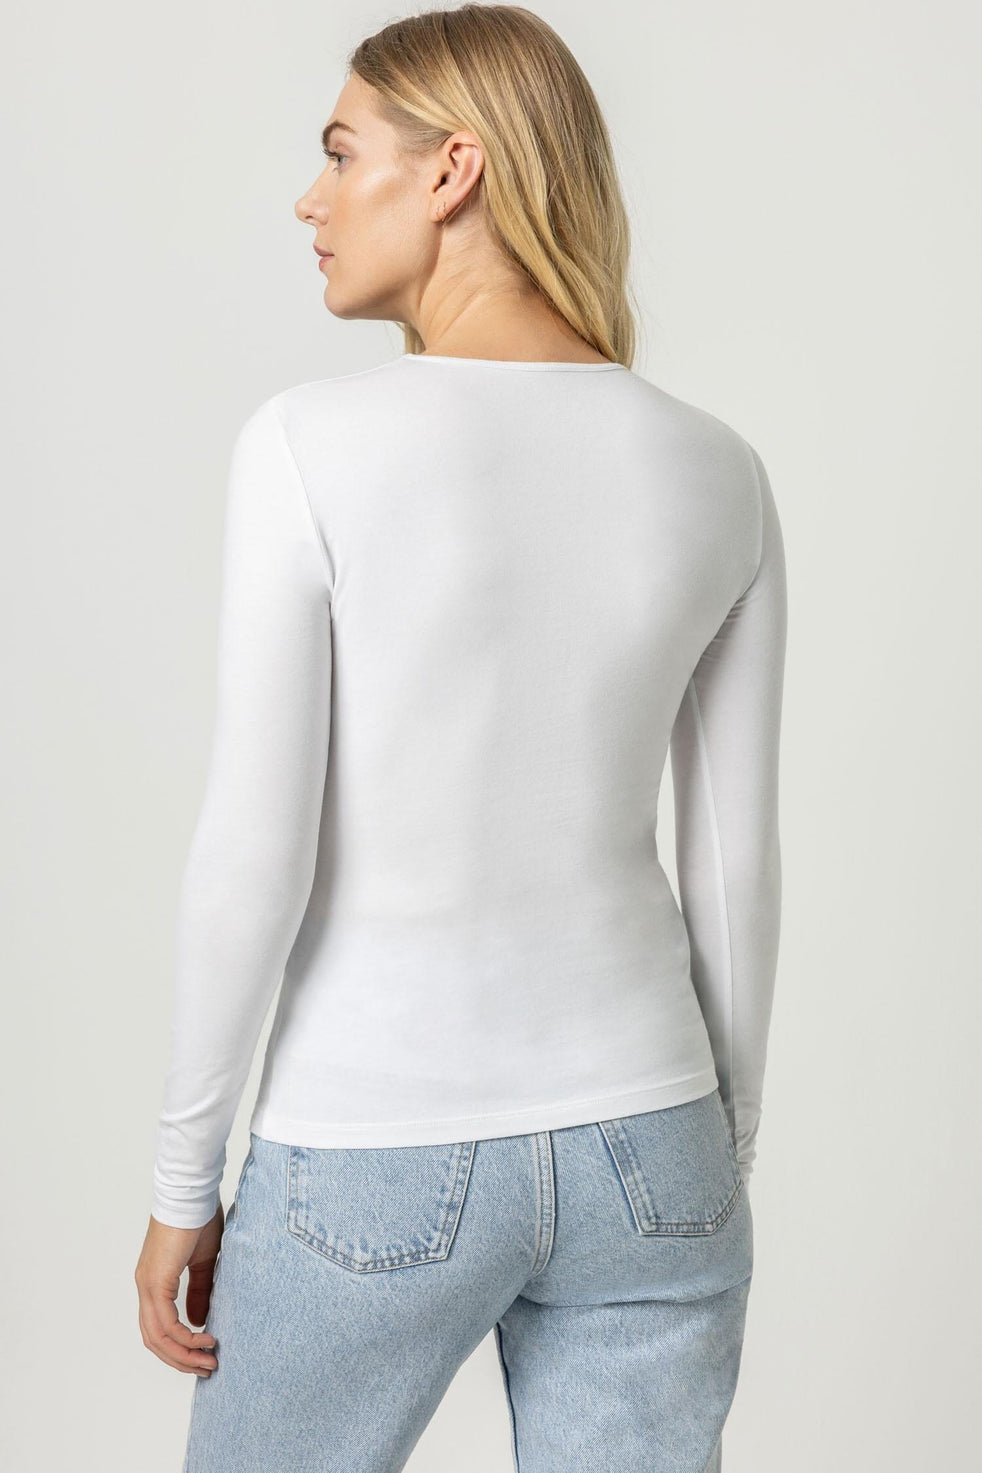 Tops, Dresses, Sweaters, Bottoms and More | Shop All at Lilla P